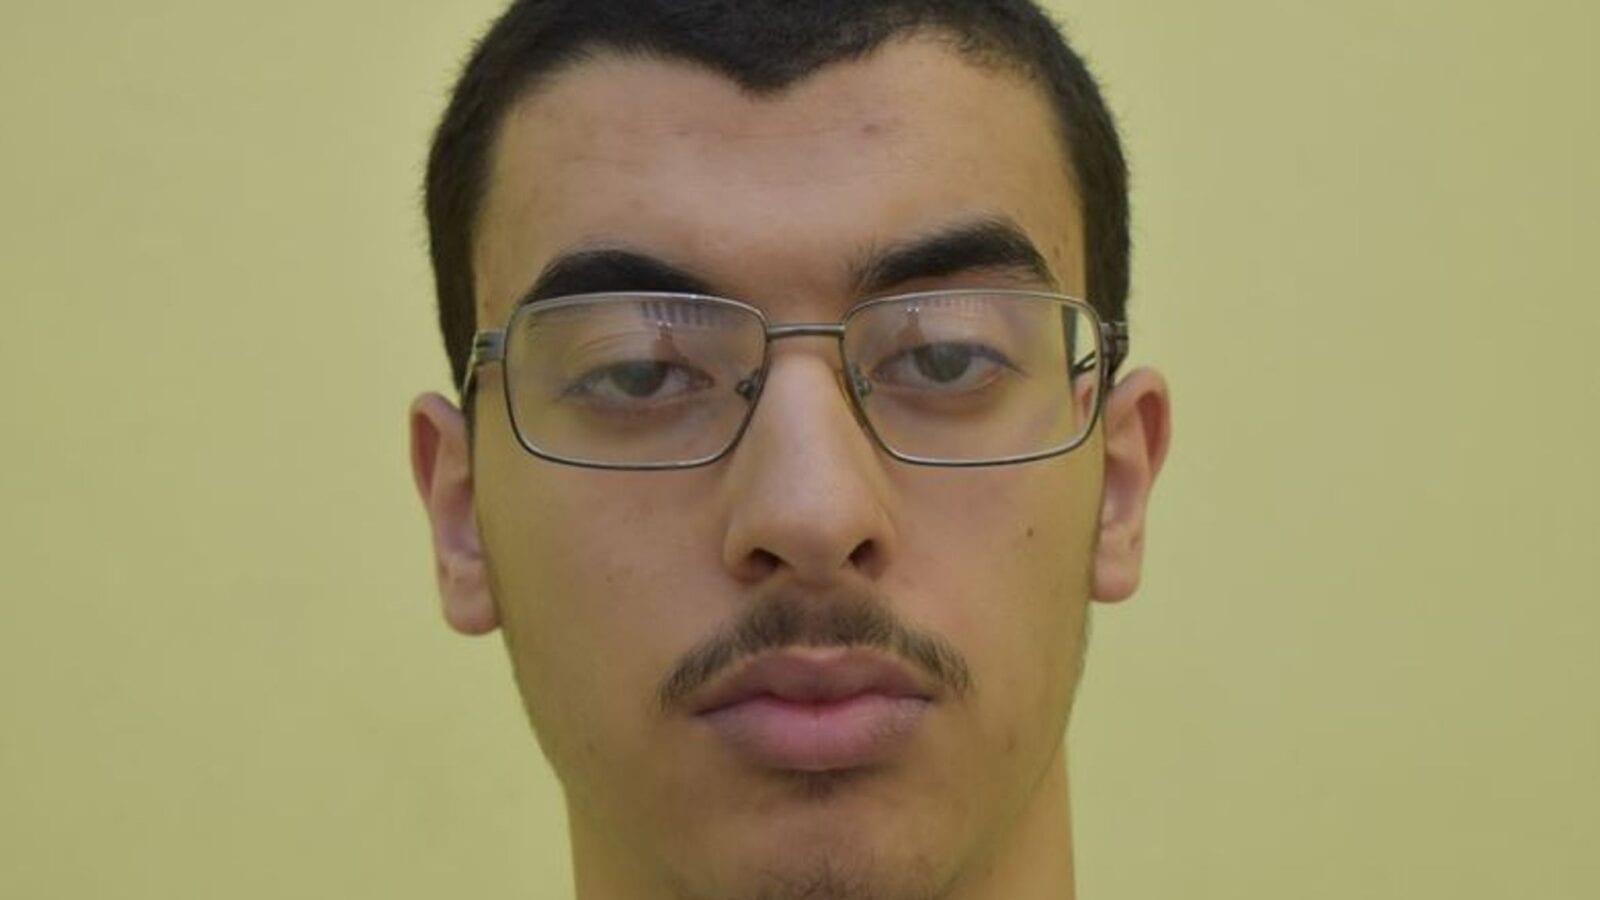 Manchester reacts as Hashem Abedi is sentenced to 55 years in prison, The Manc